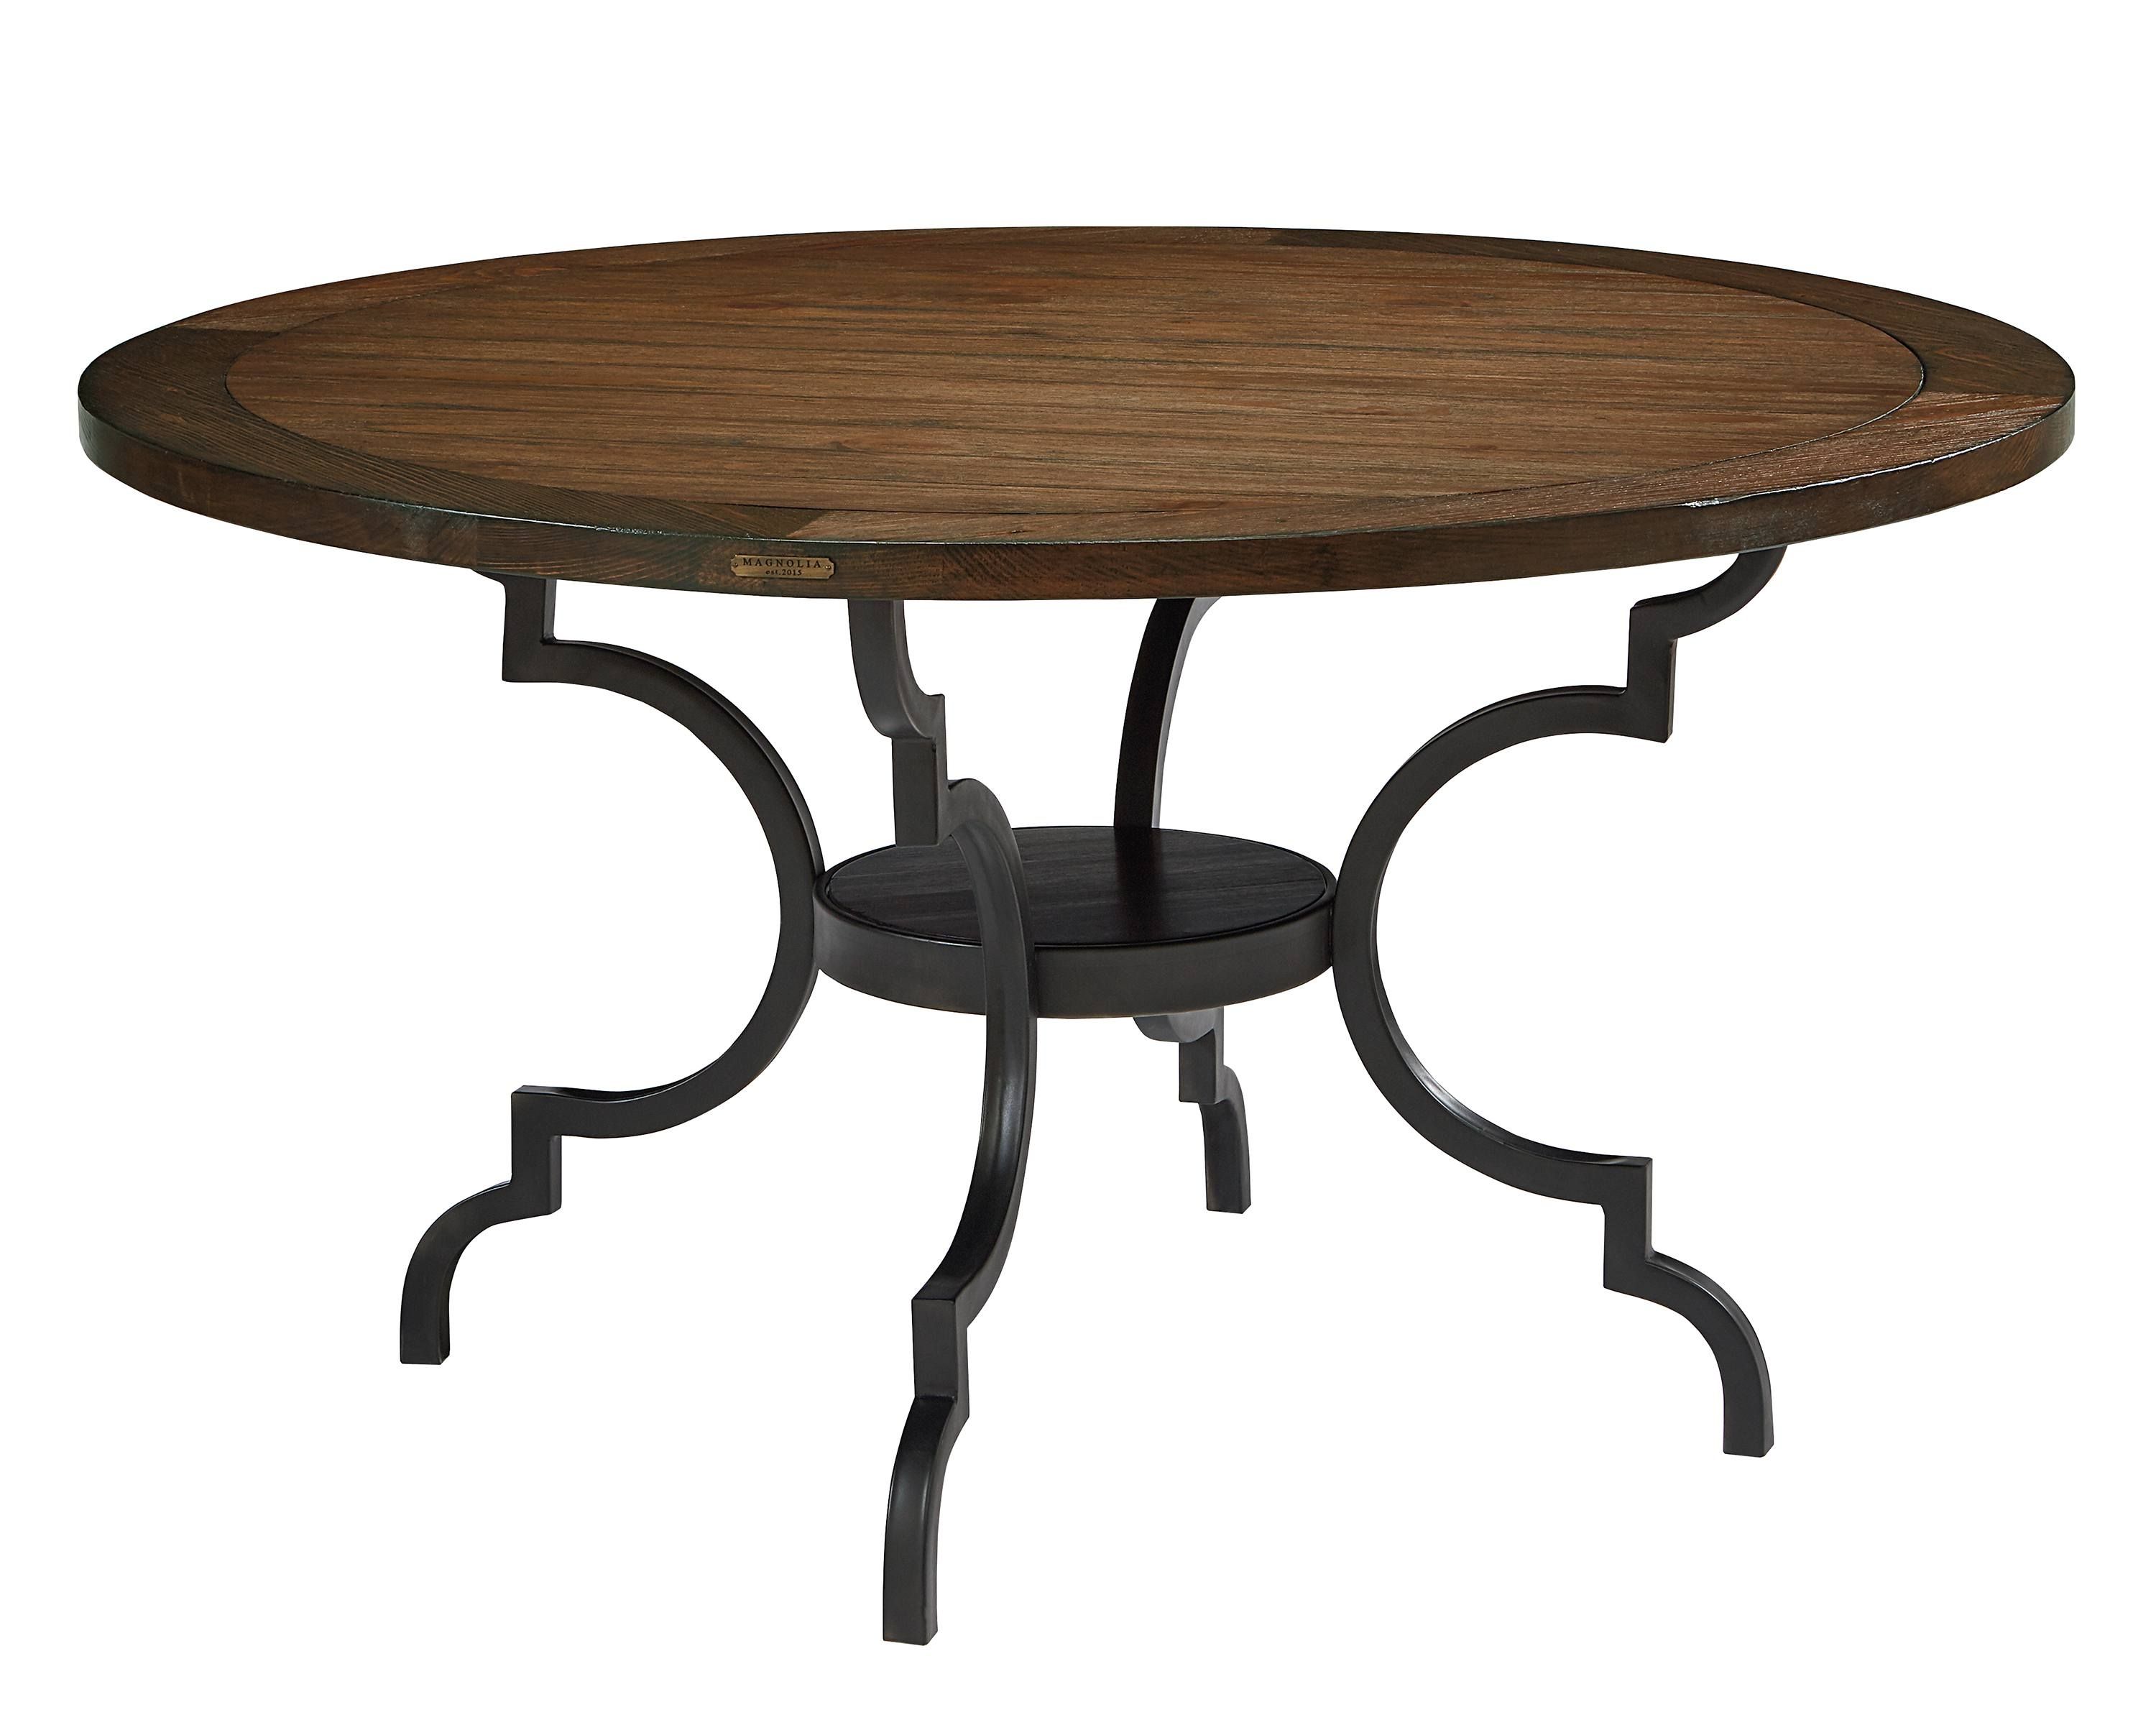 Breakfast Table – Magnolia Home In Current Magnolia Home Breakfast Round Black Dining Tables (View 4 of 20)